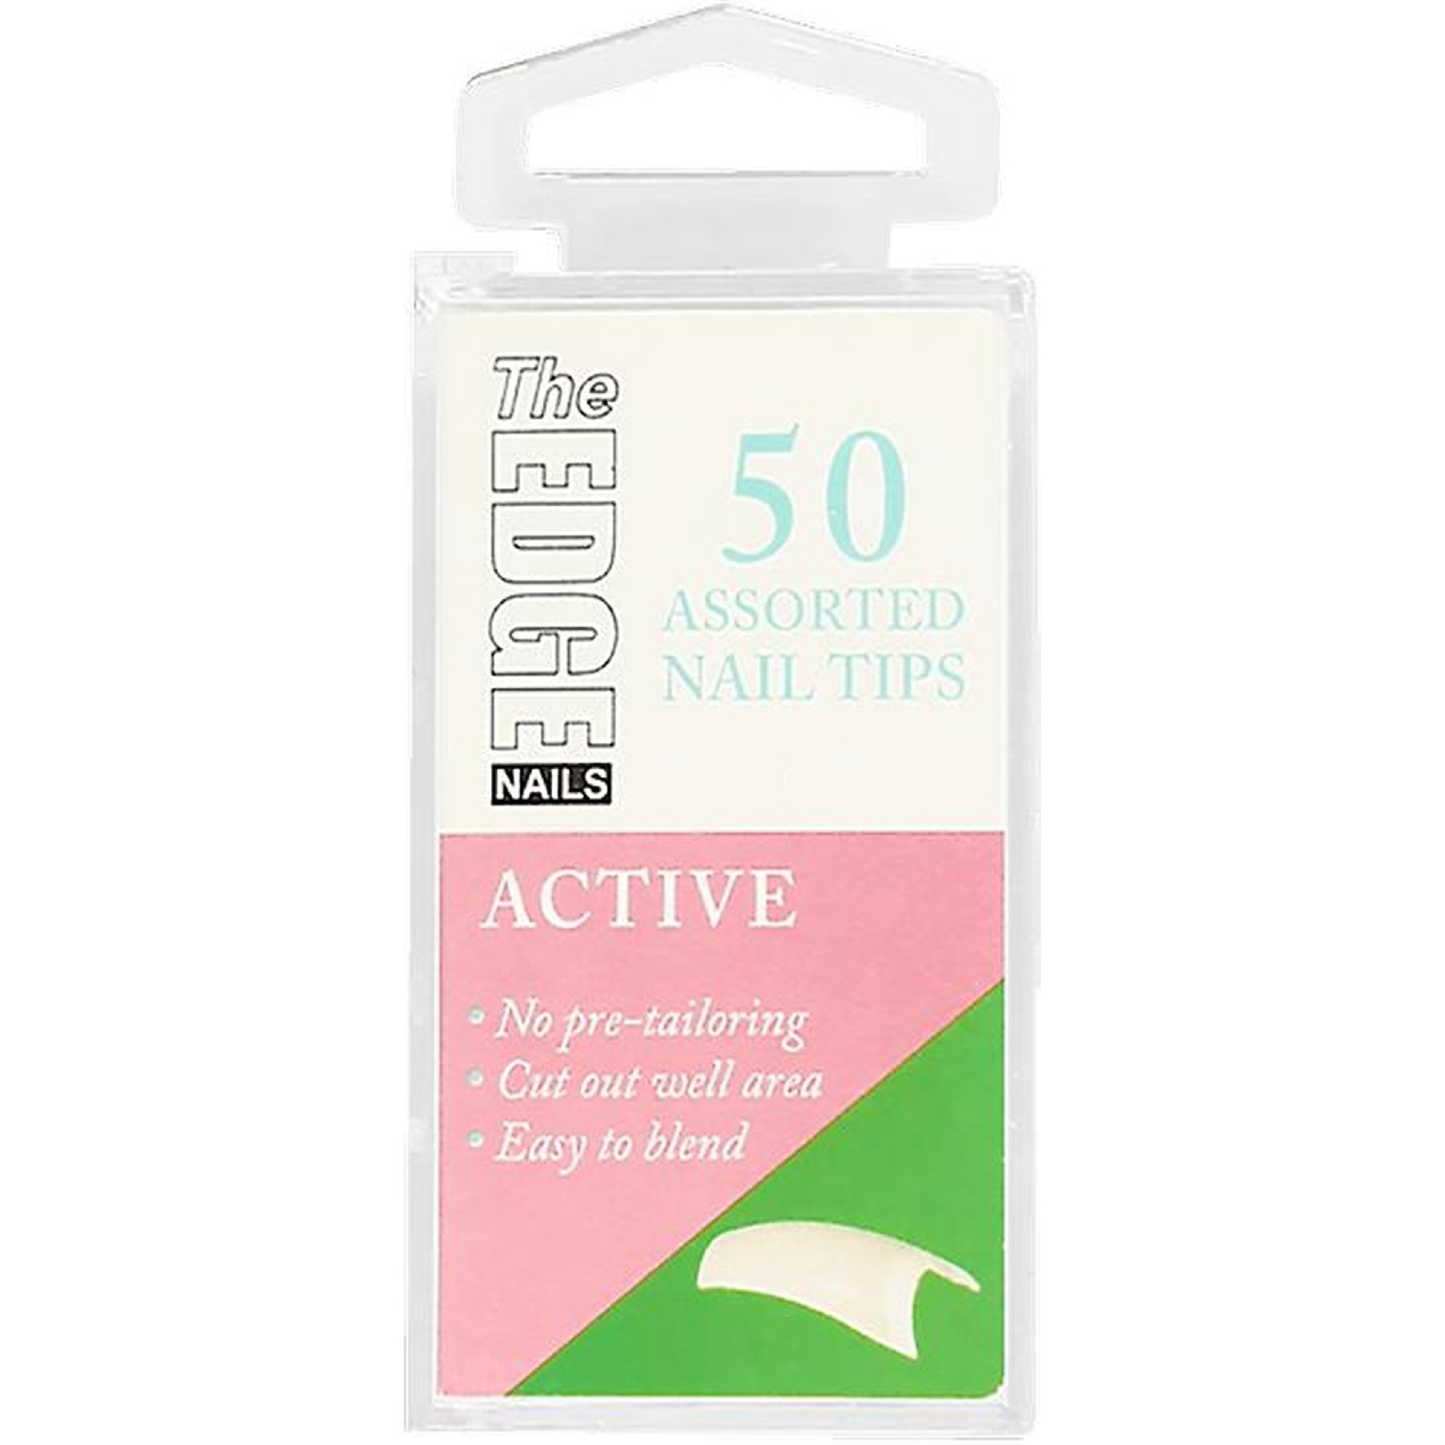 The Edge Active Nail Tips - Boxes of 50 Tips - Size 8 (SHOP)